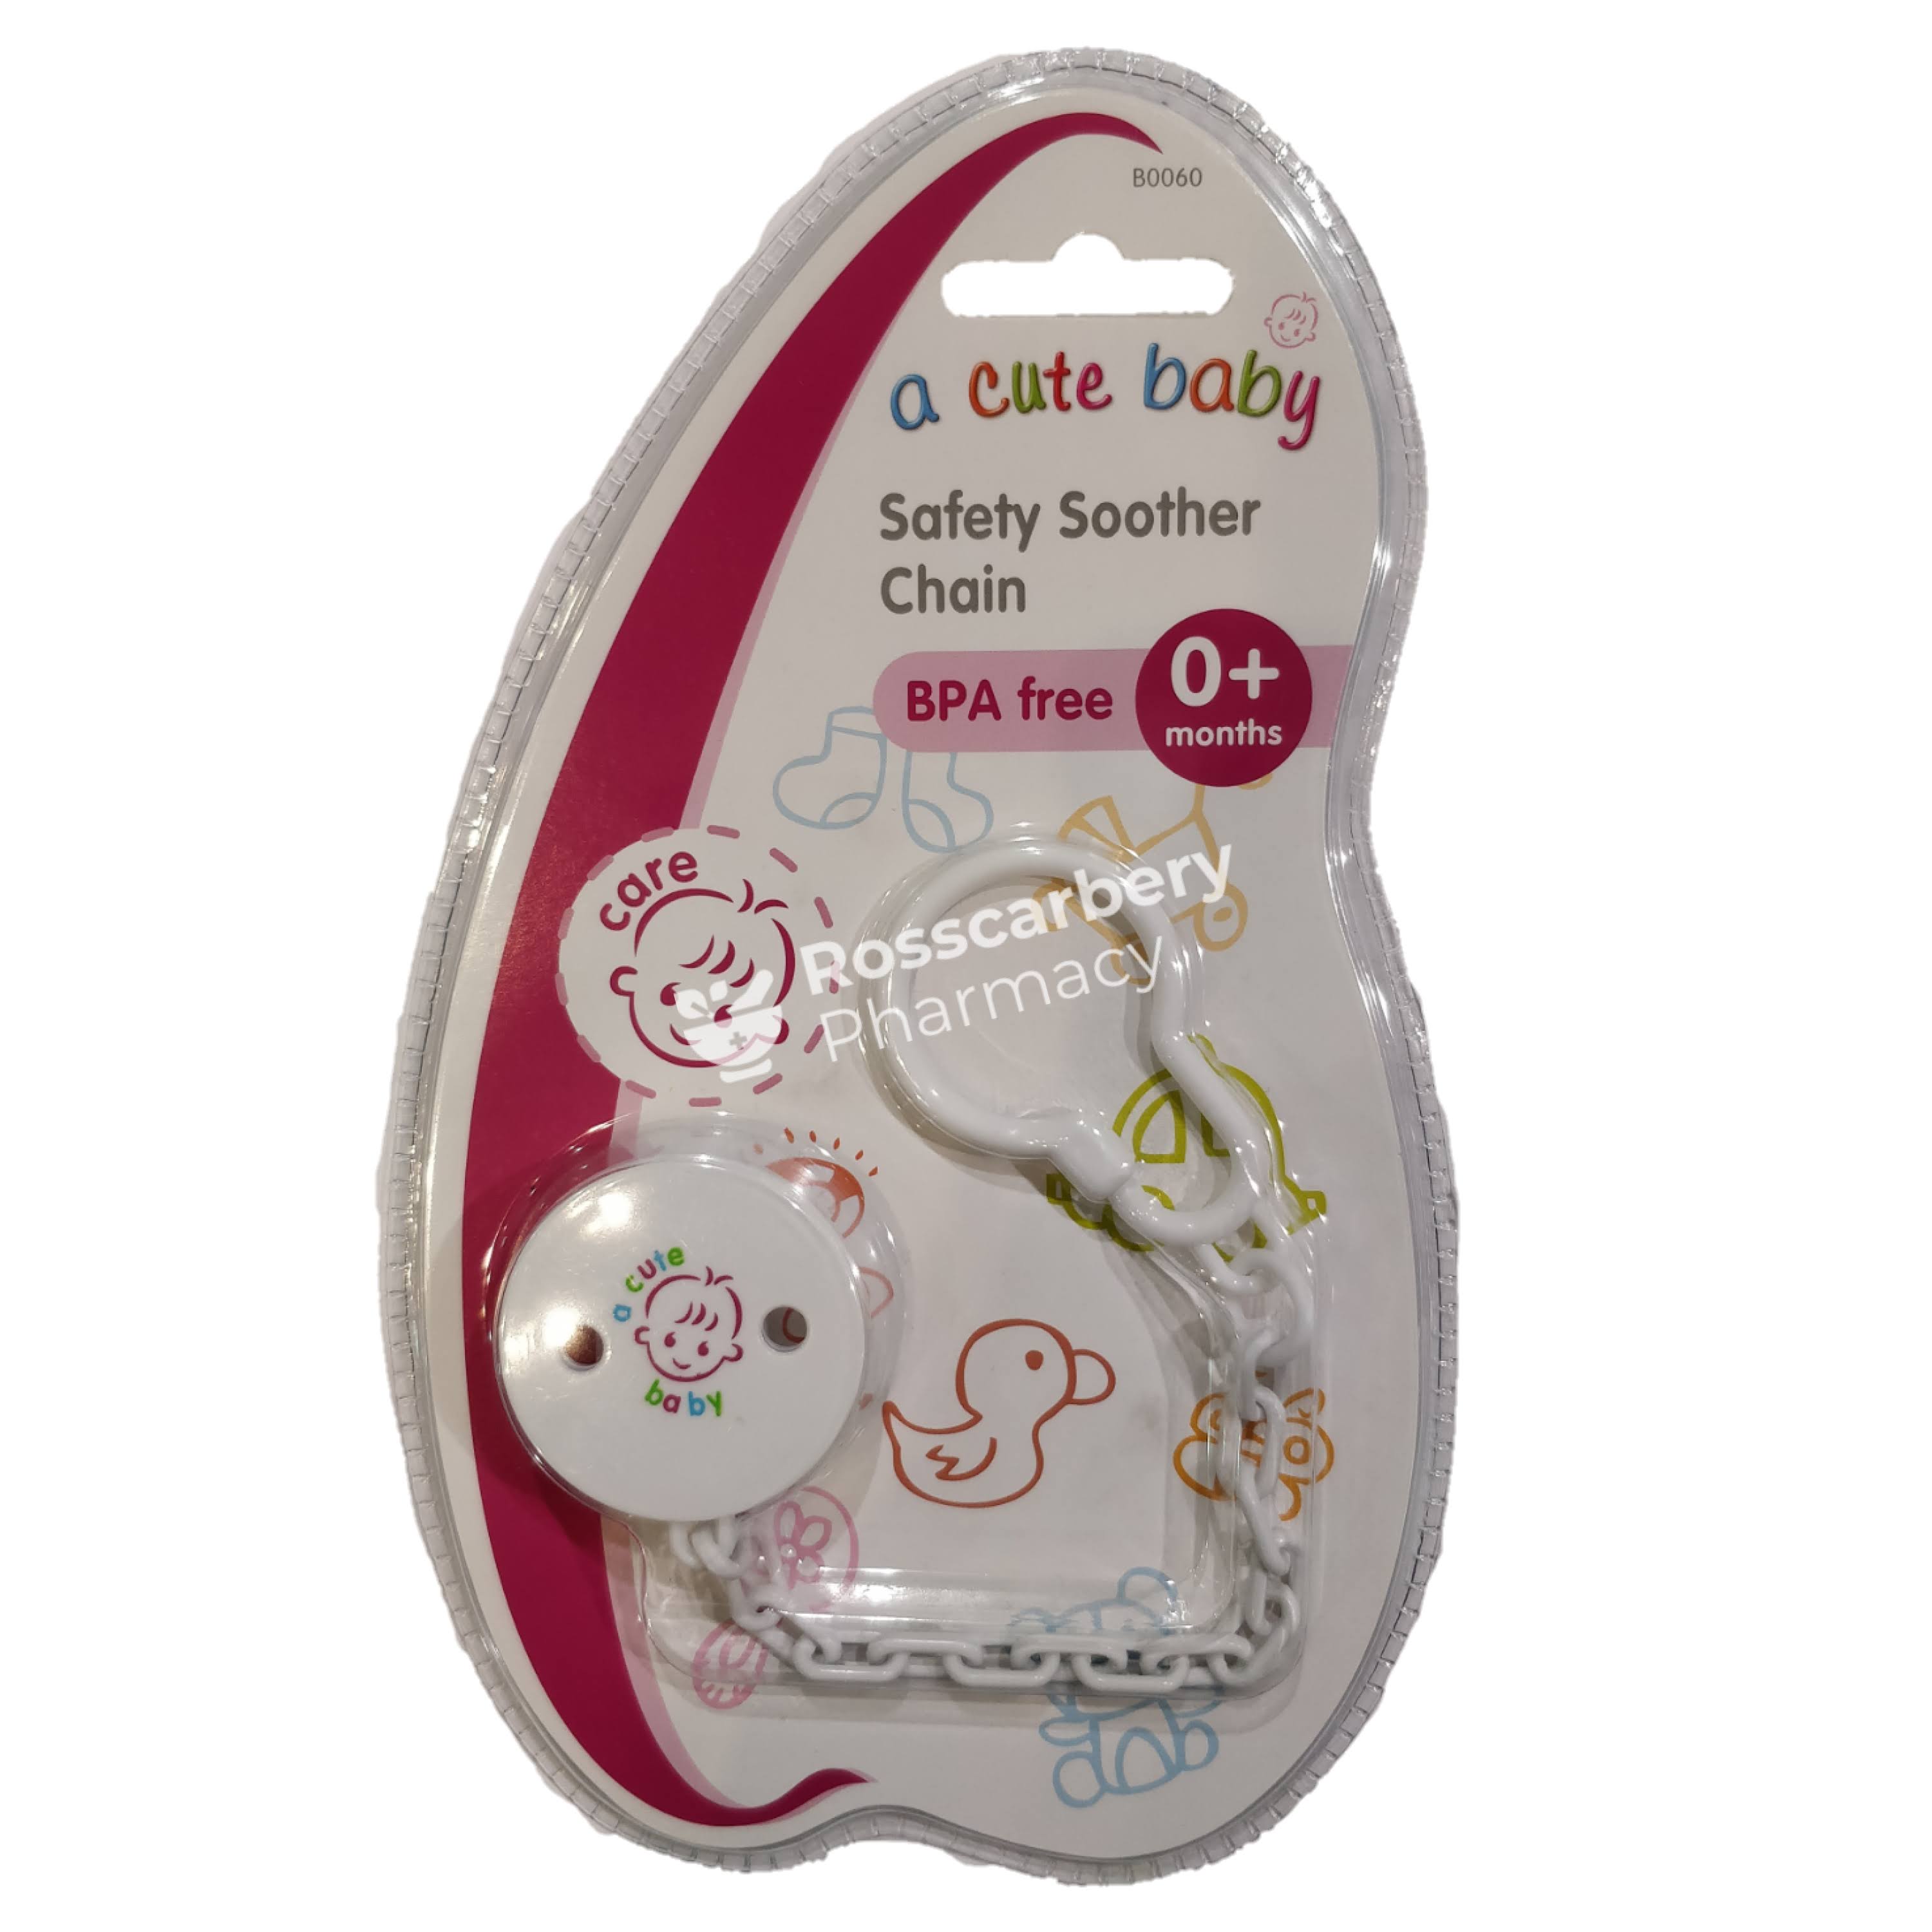 A Cute Baby Safety Soother Chain 0+months 1